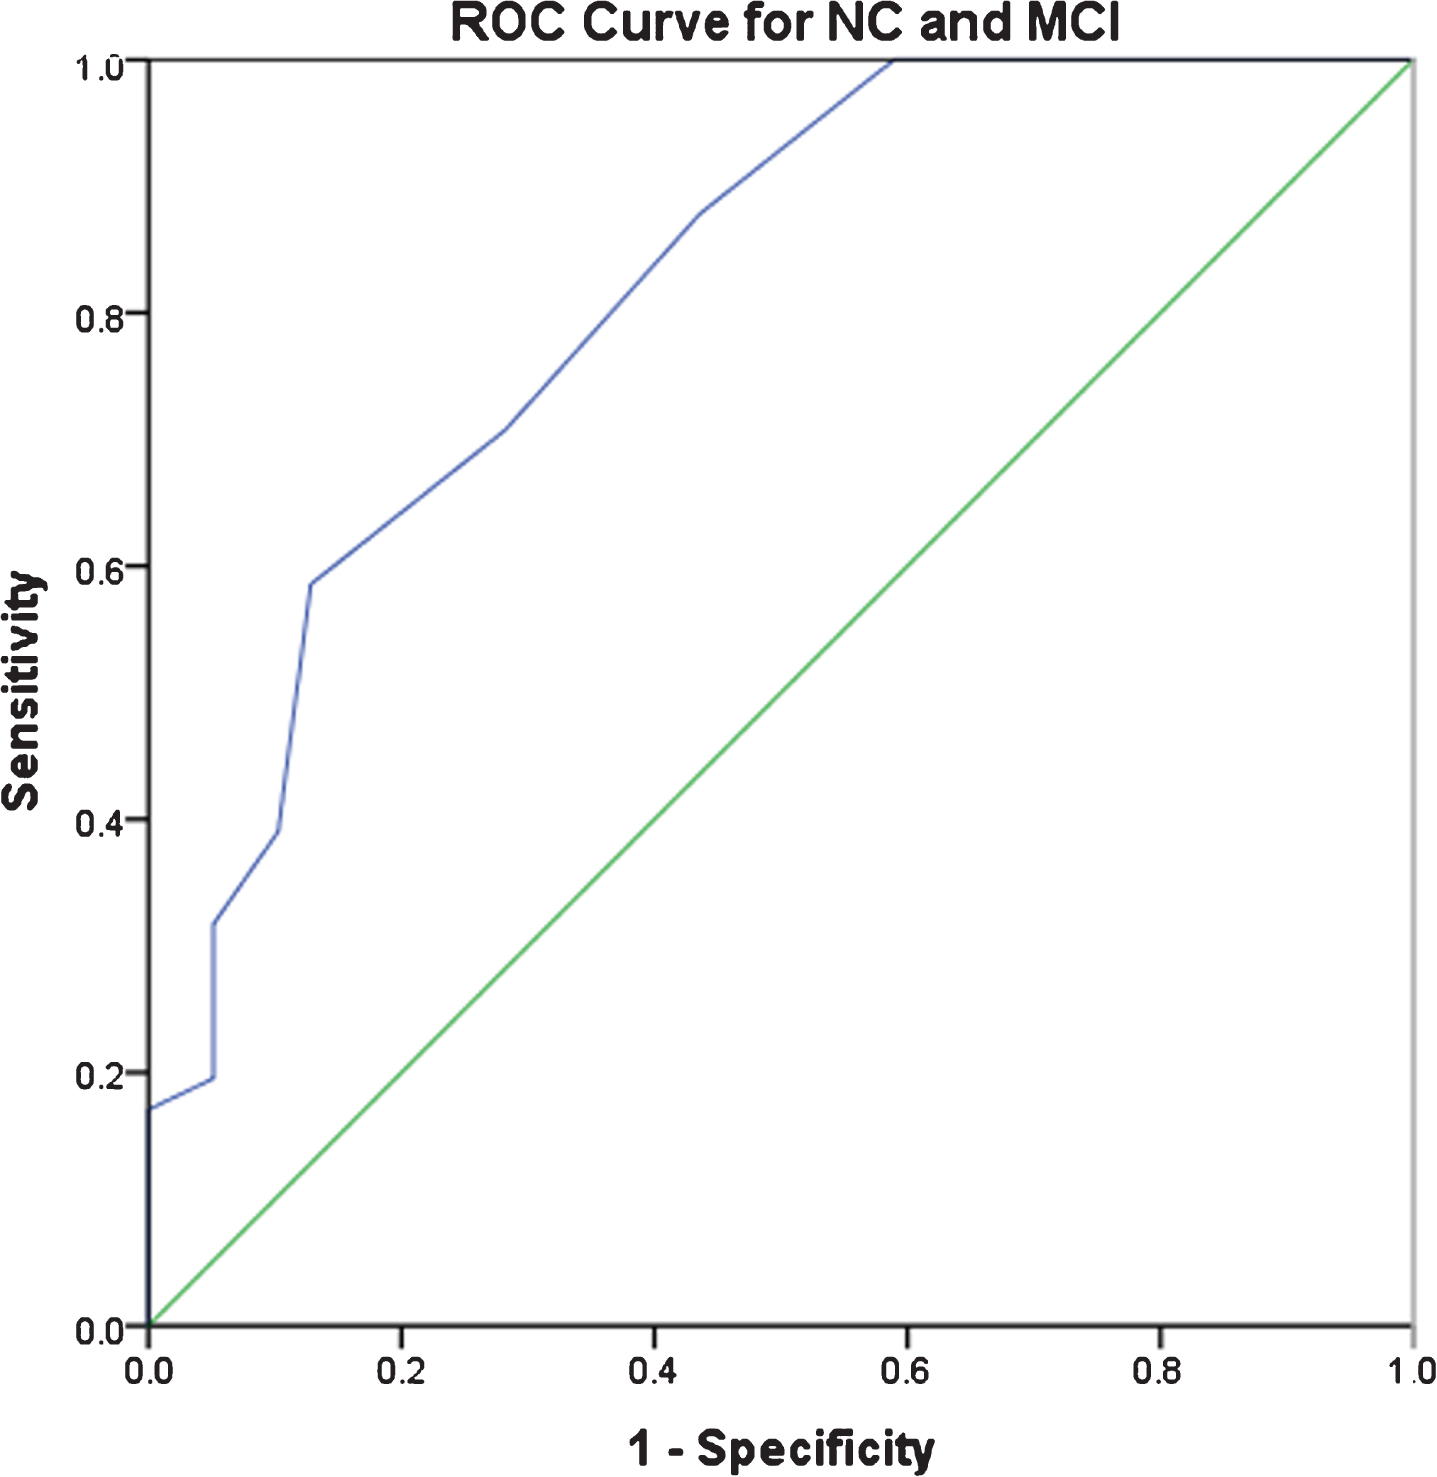 ROC Curves for discriminating NC, MCI, and PDD.